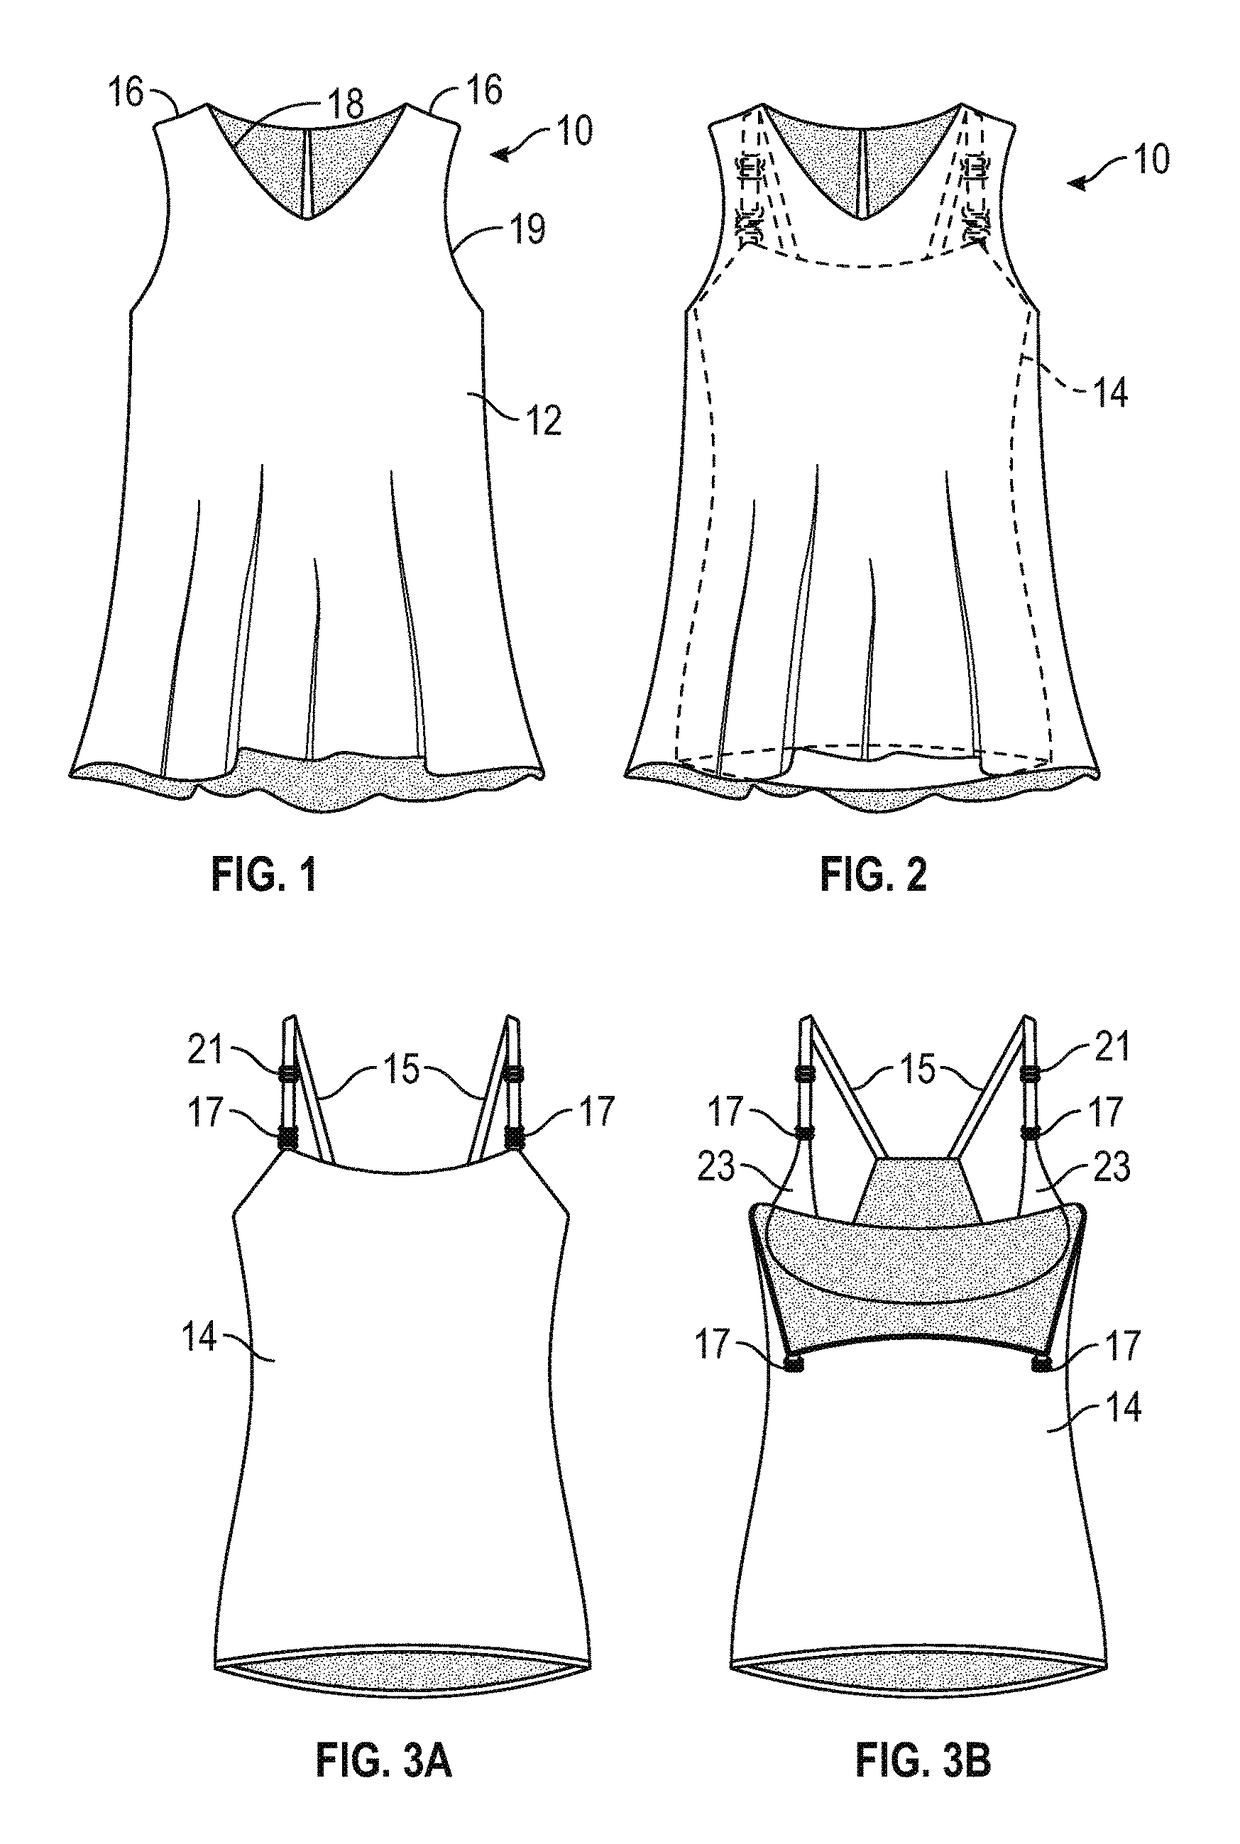 Convertible garment for carrying and feeding infants